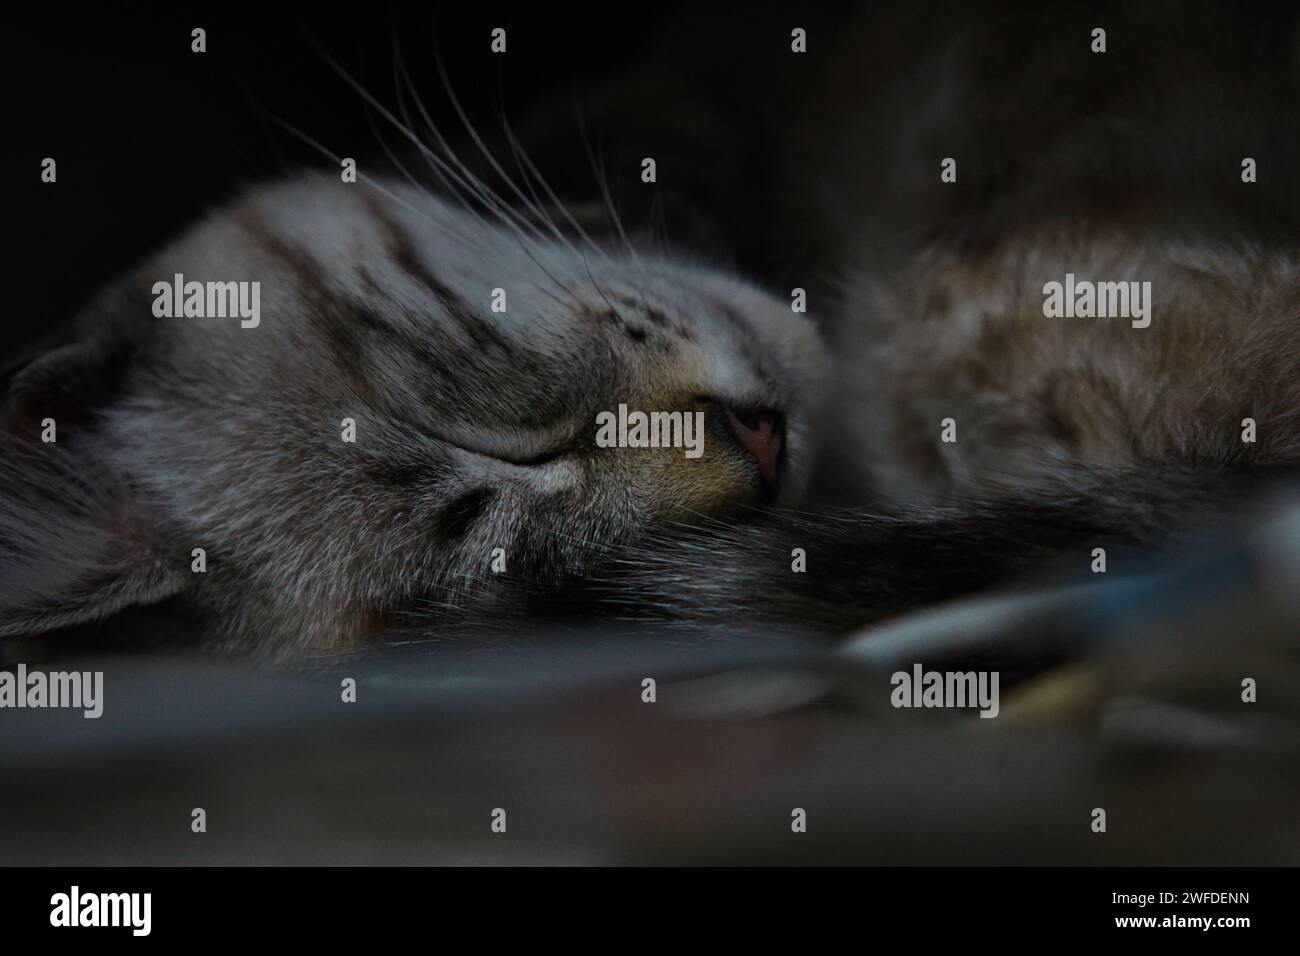 A Contented feline peacefully slumbers, head resting in the center, eyes gently shut Stock Photo